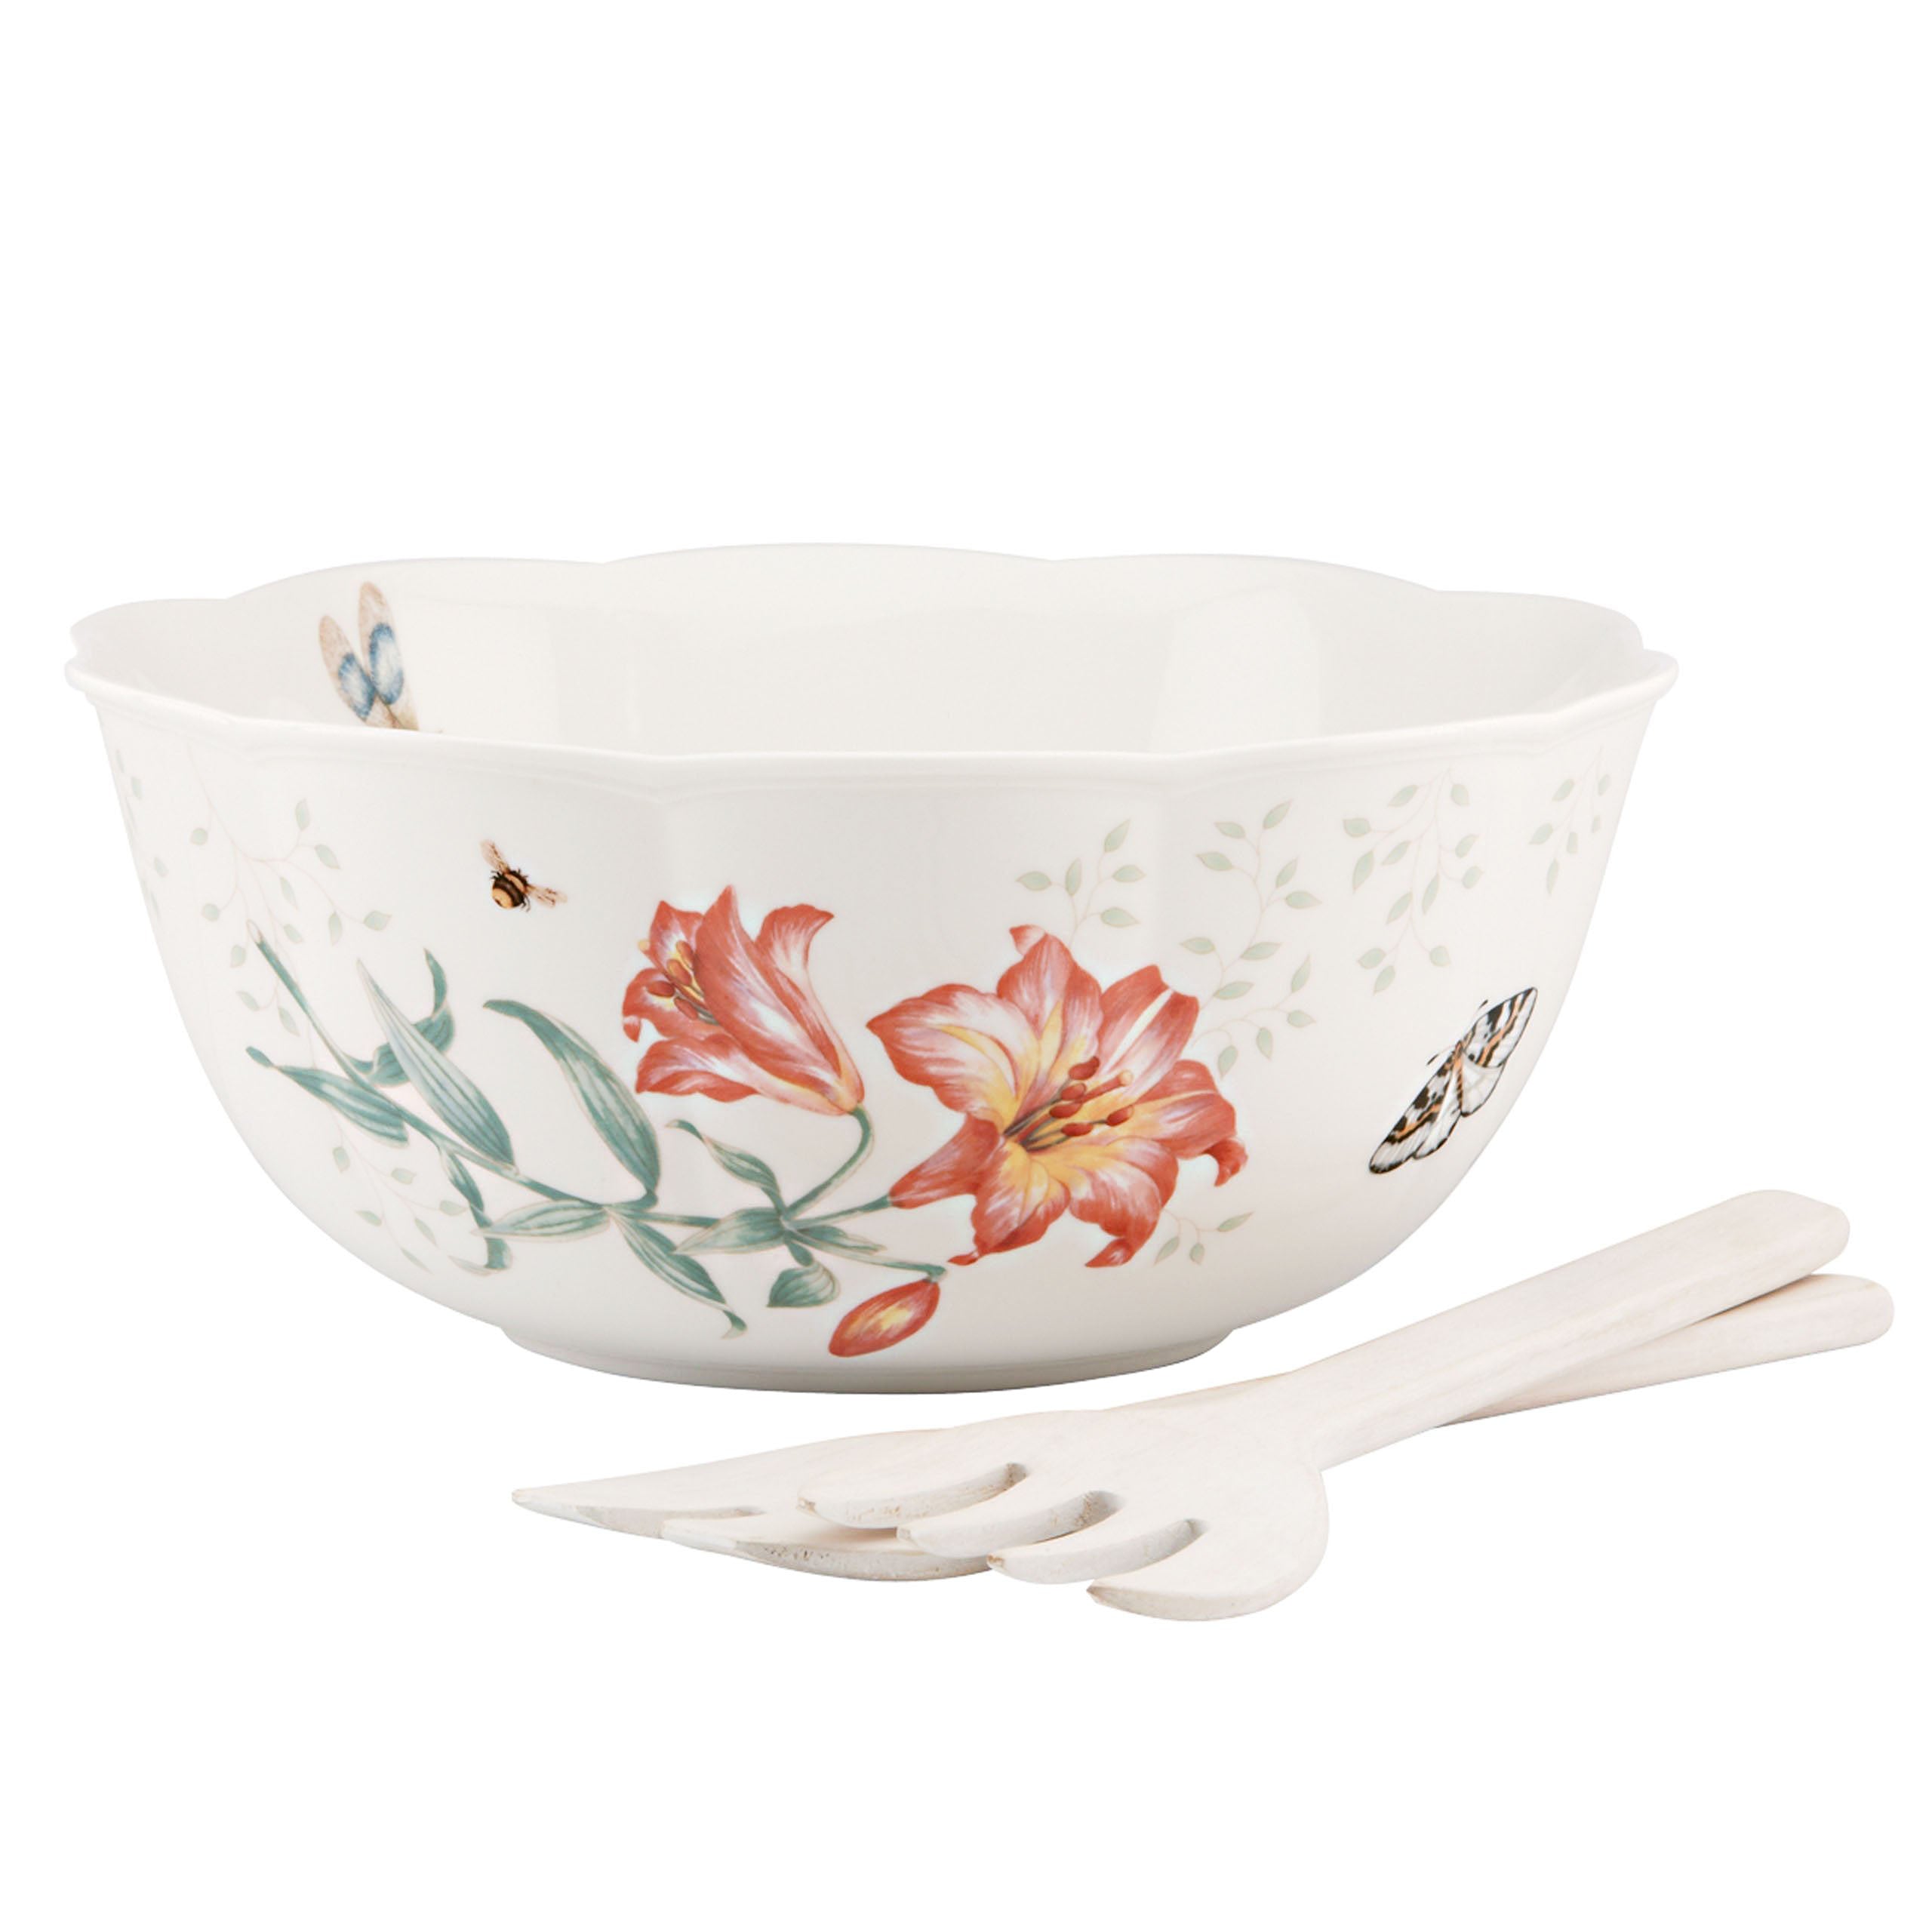 Lenox Butterfly Meadow Salad Bowl with wood servers 11.25" 820581 - Royal Gift